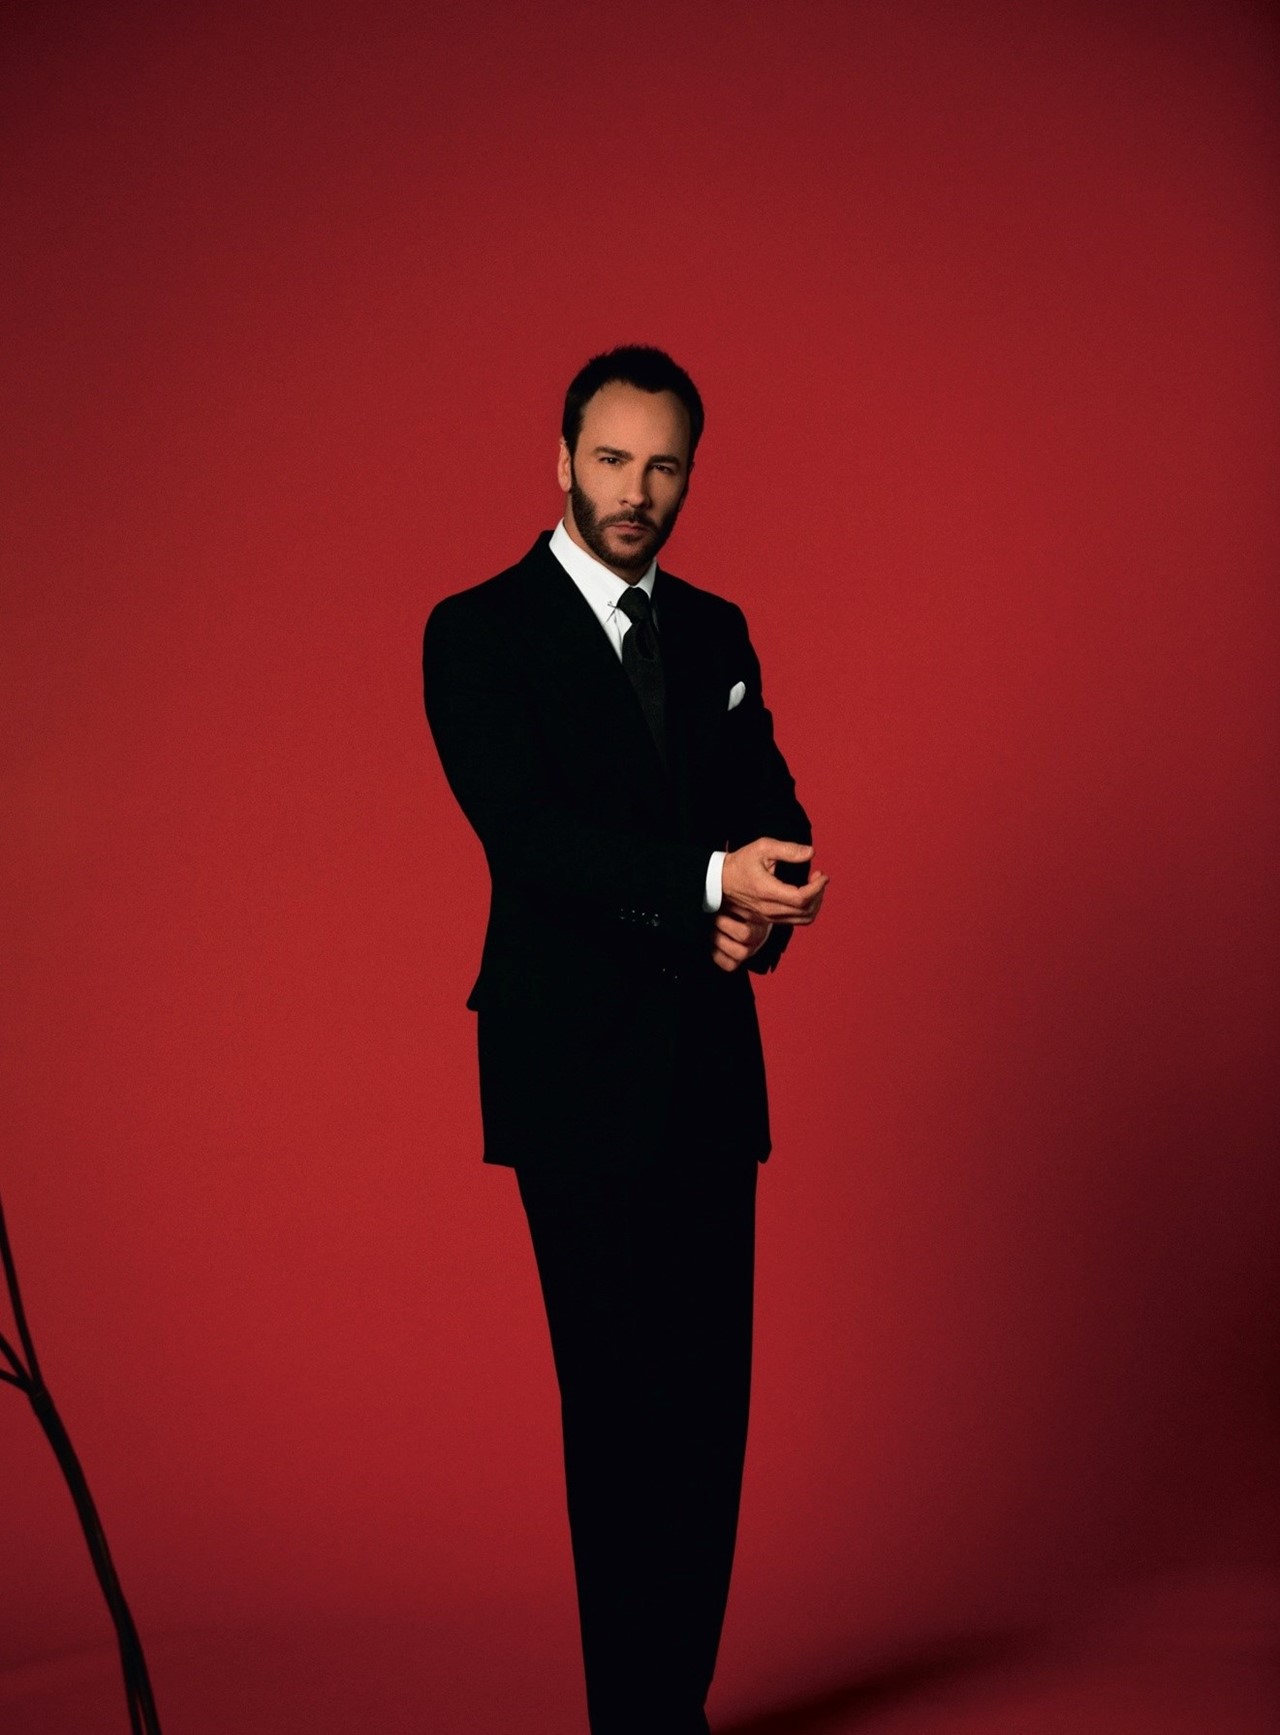 Tom Ford becomes a billionaire after selling fashion brand to